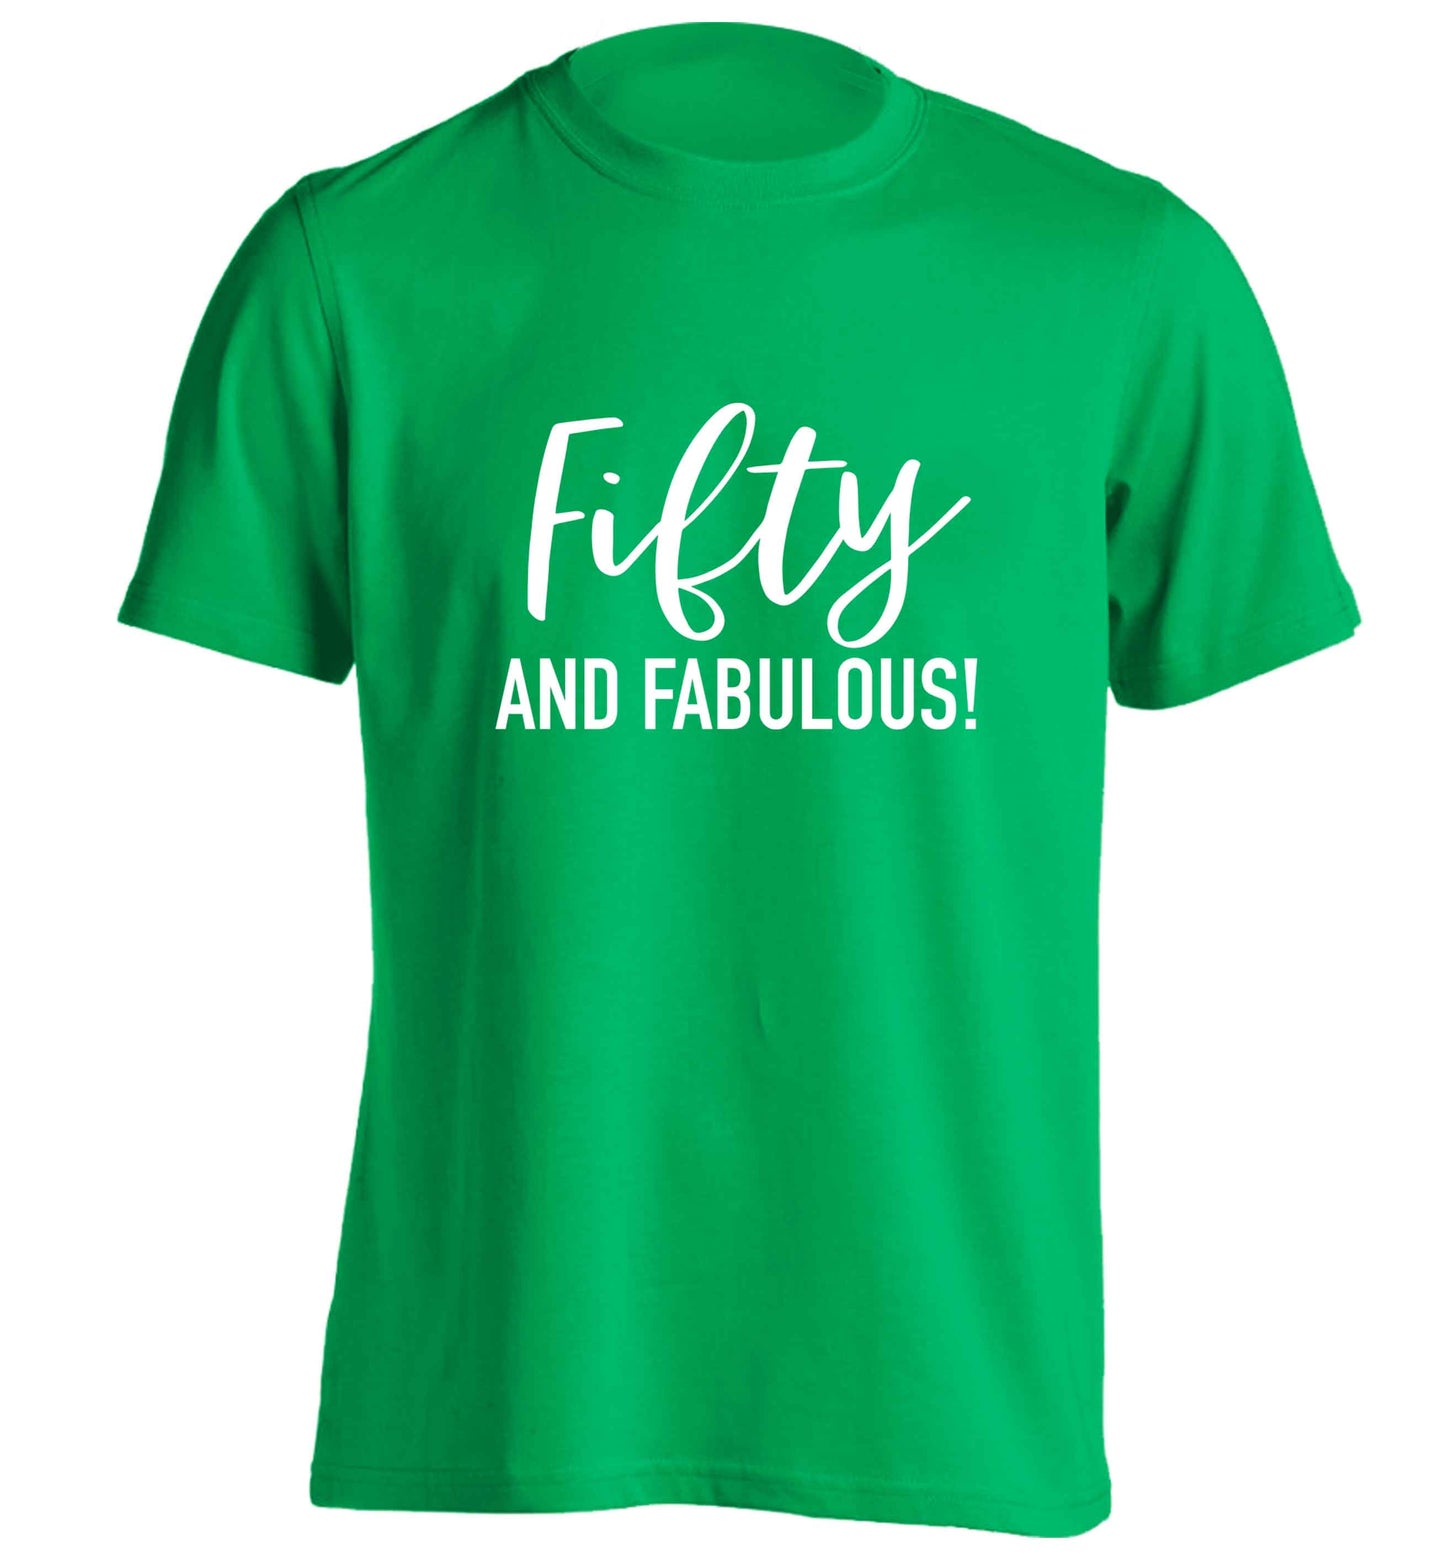 Fifty and fabulous adults unisex green Tshirt 2XL